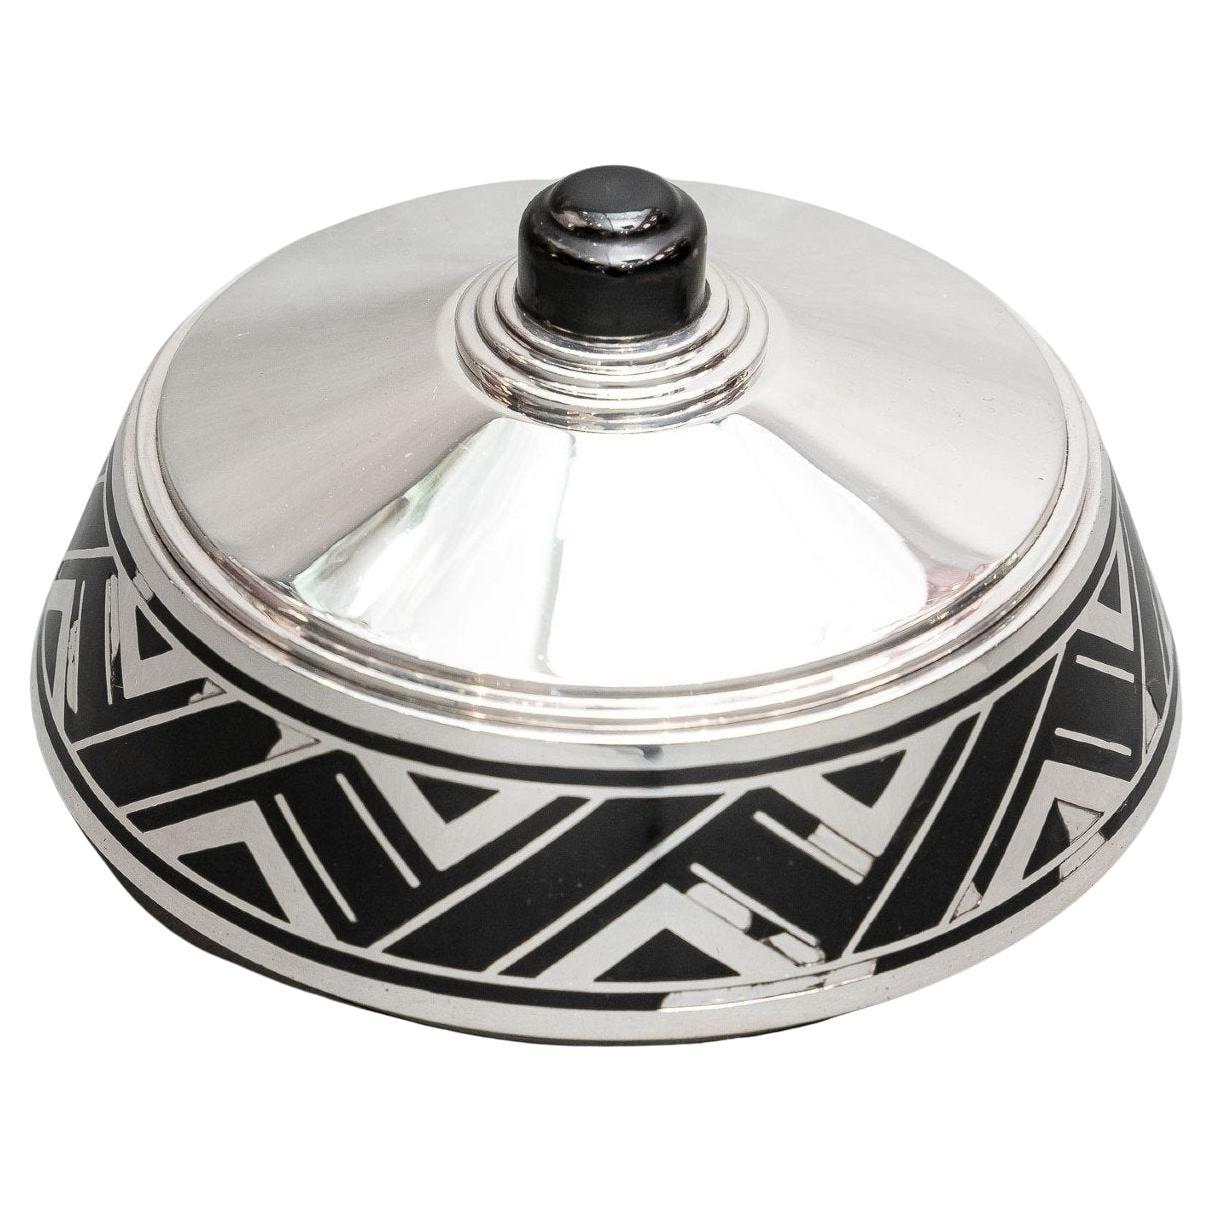 Silversmith r. Linzeler - box in solid silver and black enamel - art deco period For Sale